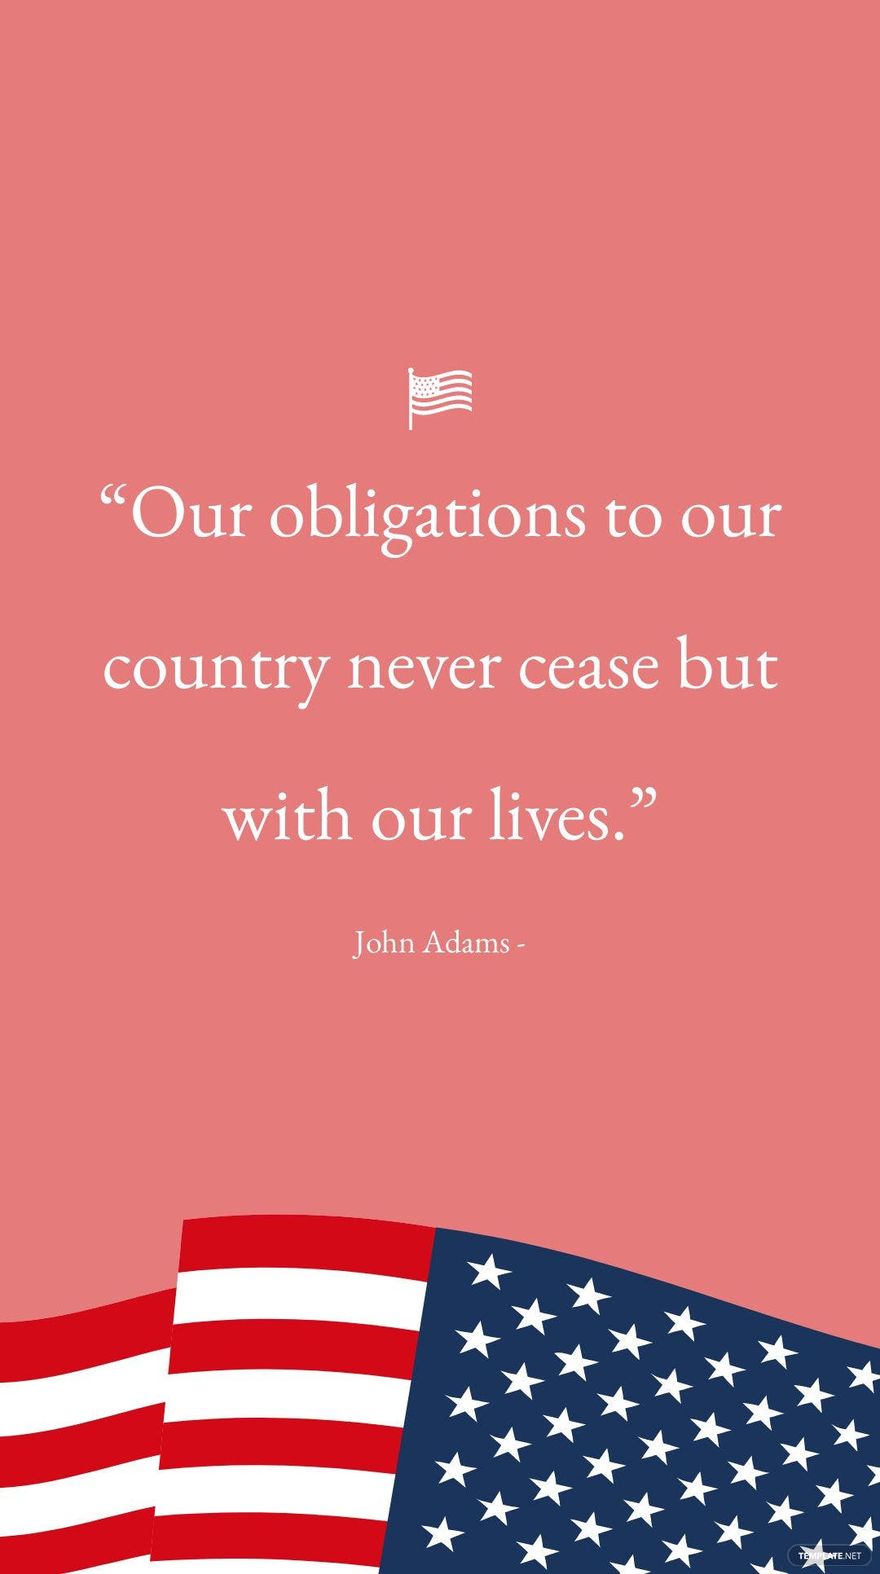 John Adams - “Our obligations to our country never cease but with our lives.”